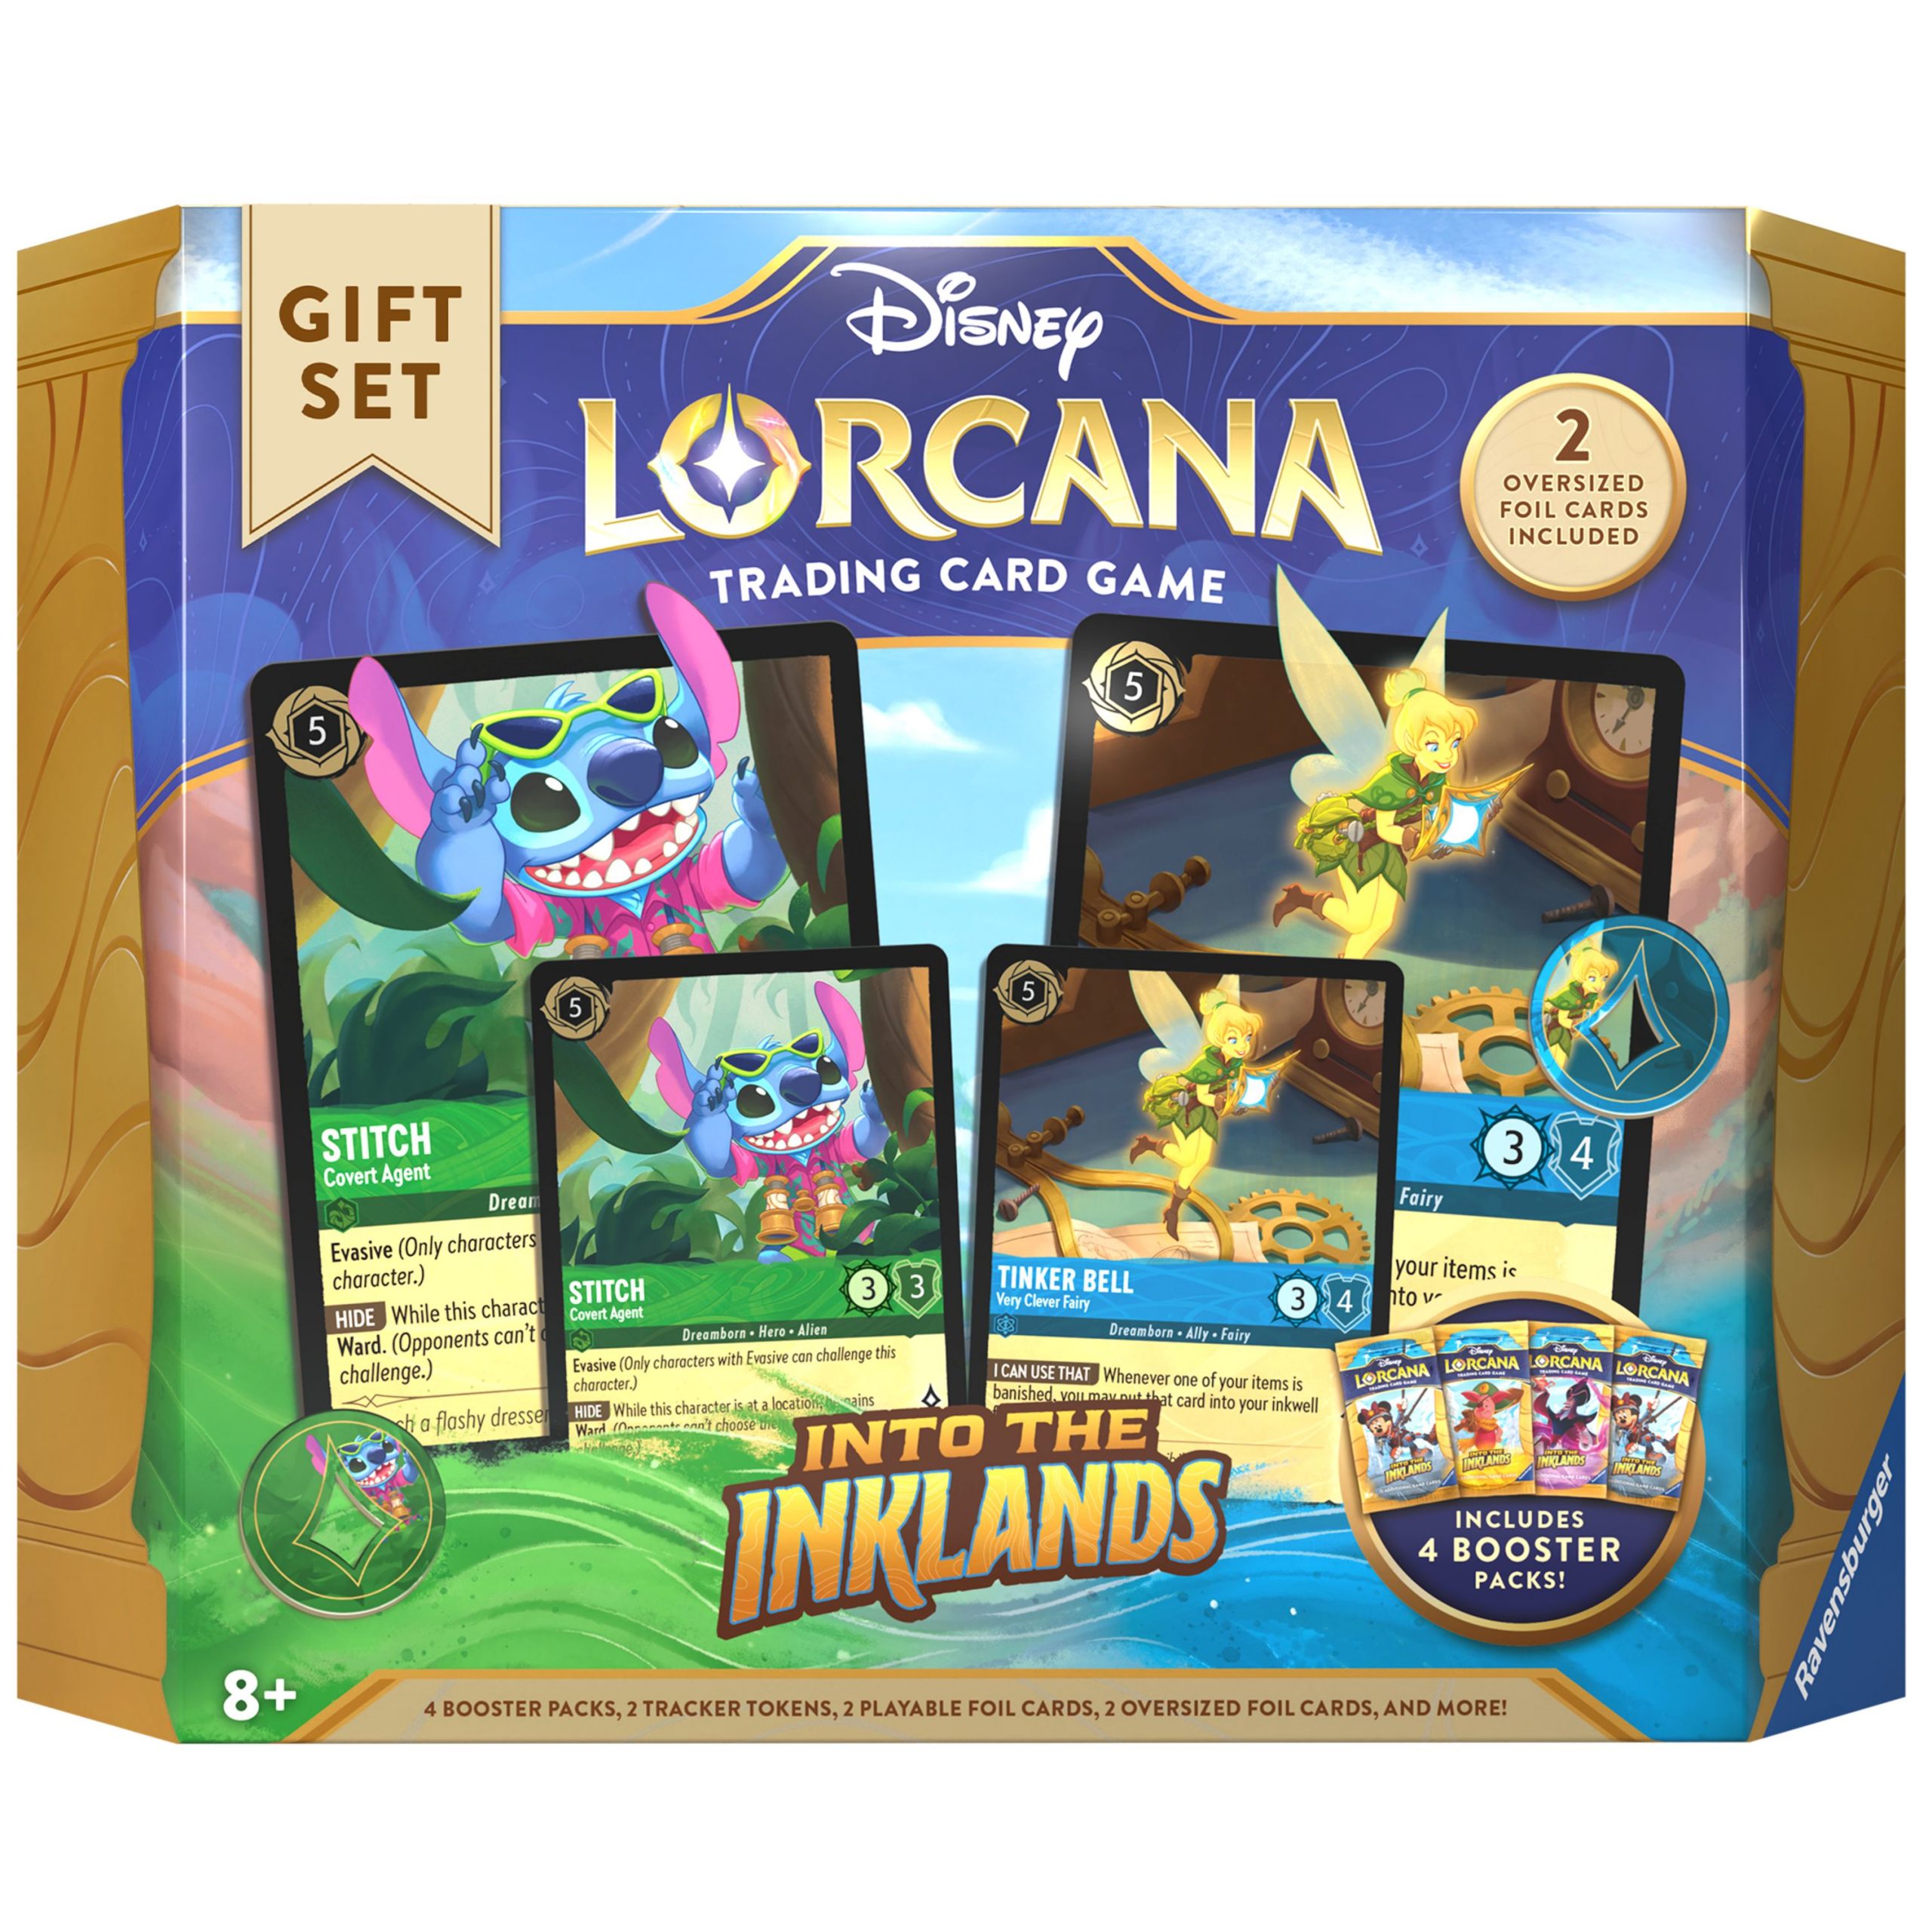 DISNEY LORCANA INTO THE INKLANDS GIFT SET - Disney Lorcana  Trading Card  Mint - Yugioh, Cardfight Vanguard, Trading Cards Cheap, Fast, Mint For Over  25 Years